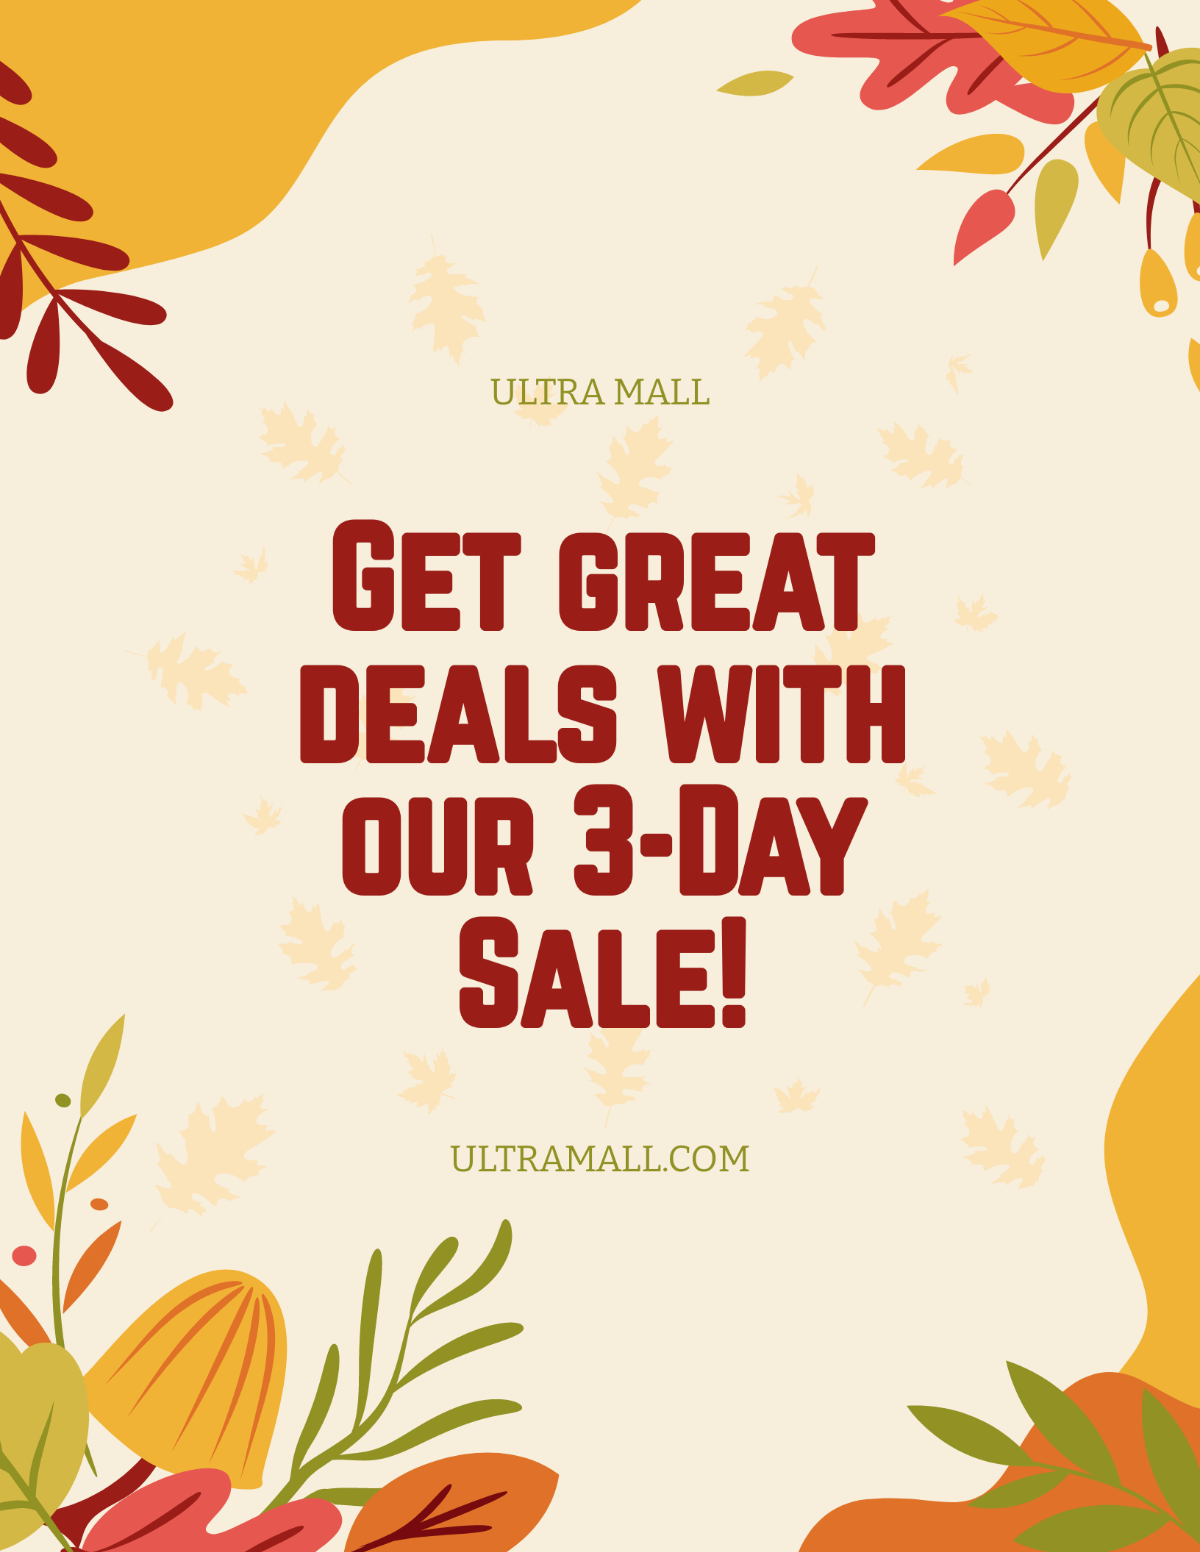 Fall/Autumn Sale Promotion Flyer Template